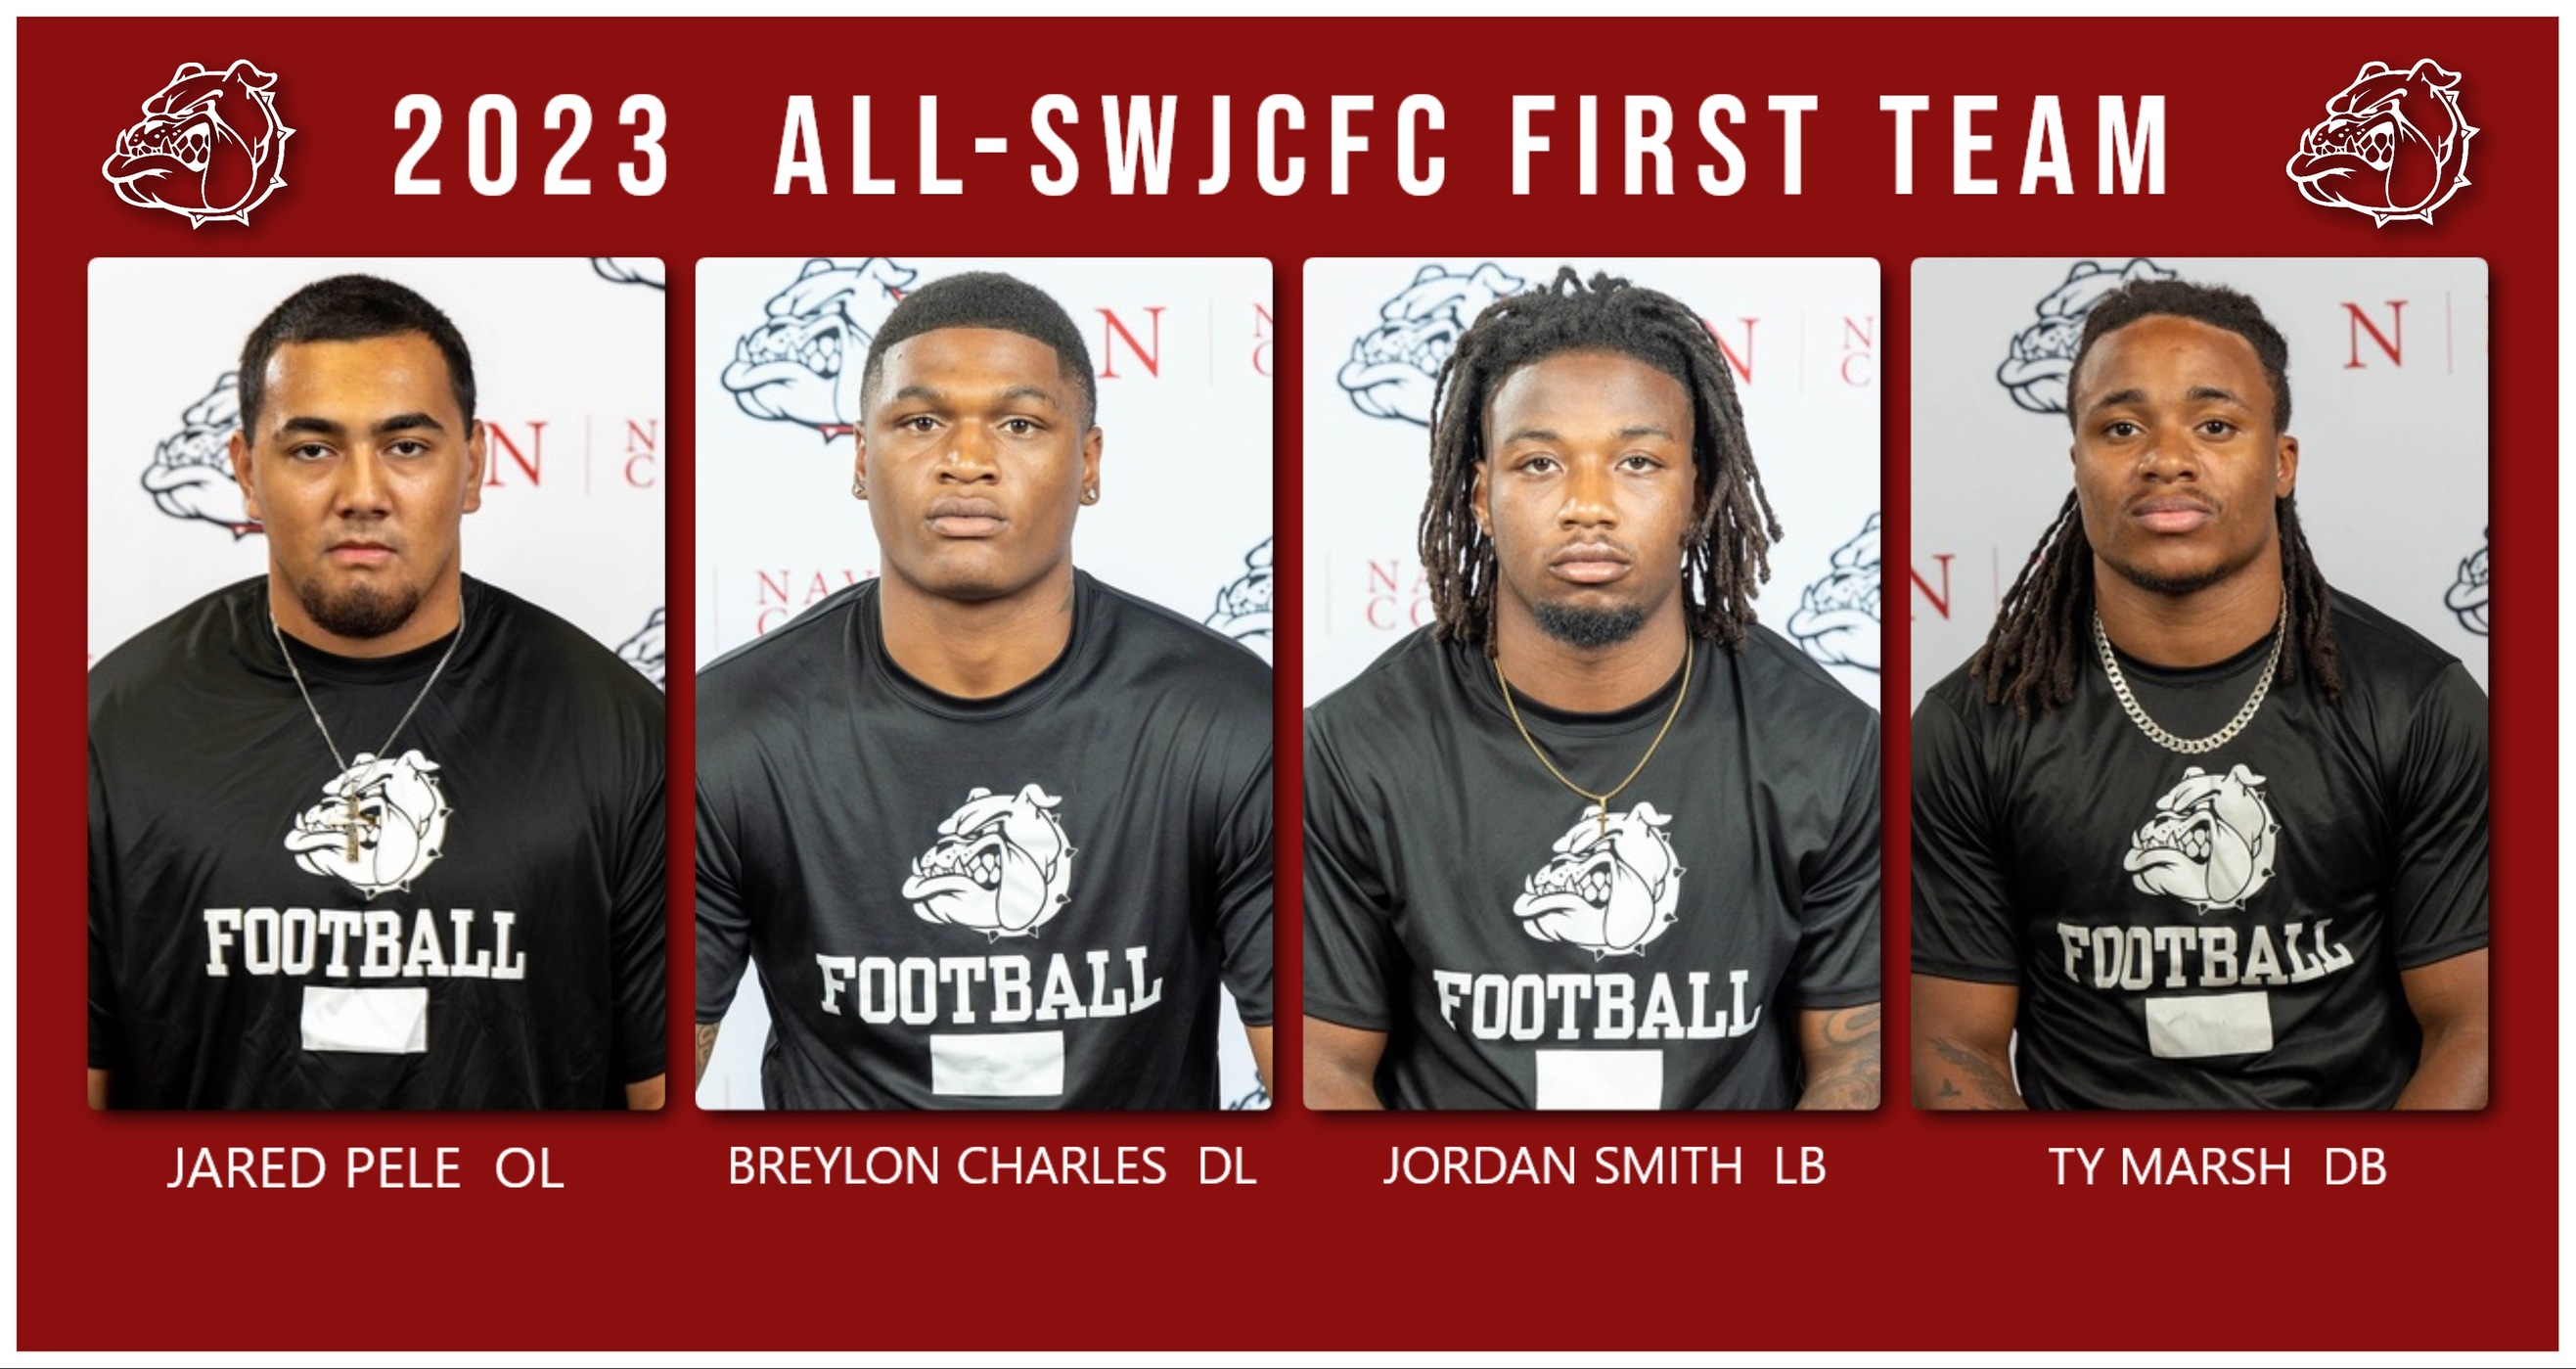 11 Bulldogs Selected To All-SWJCFC Team